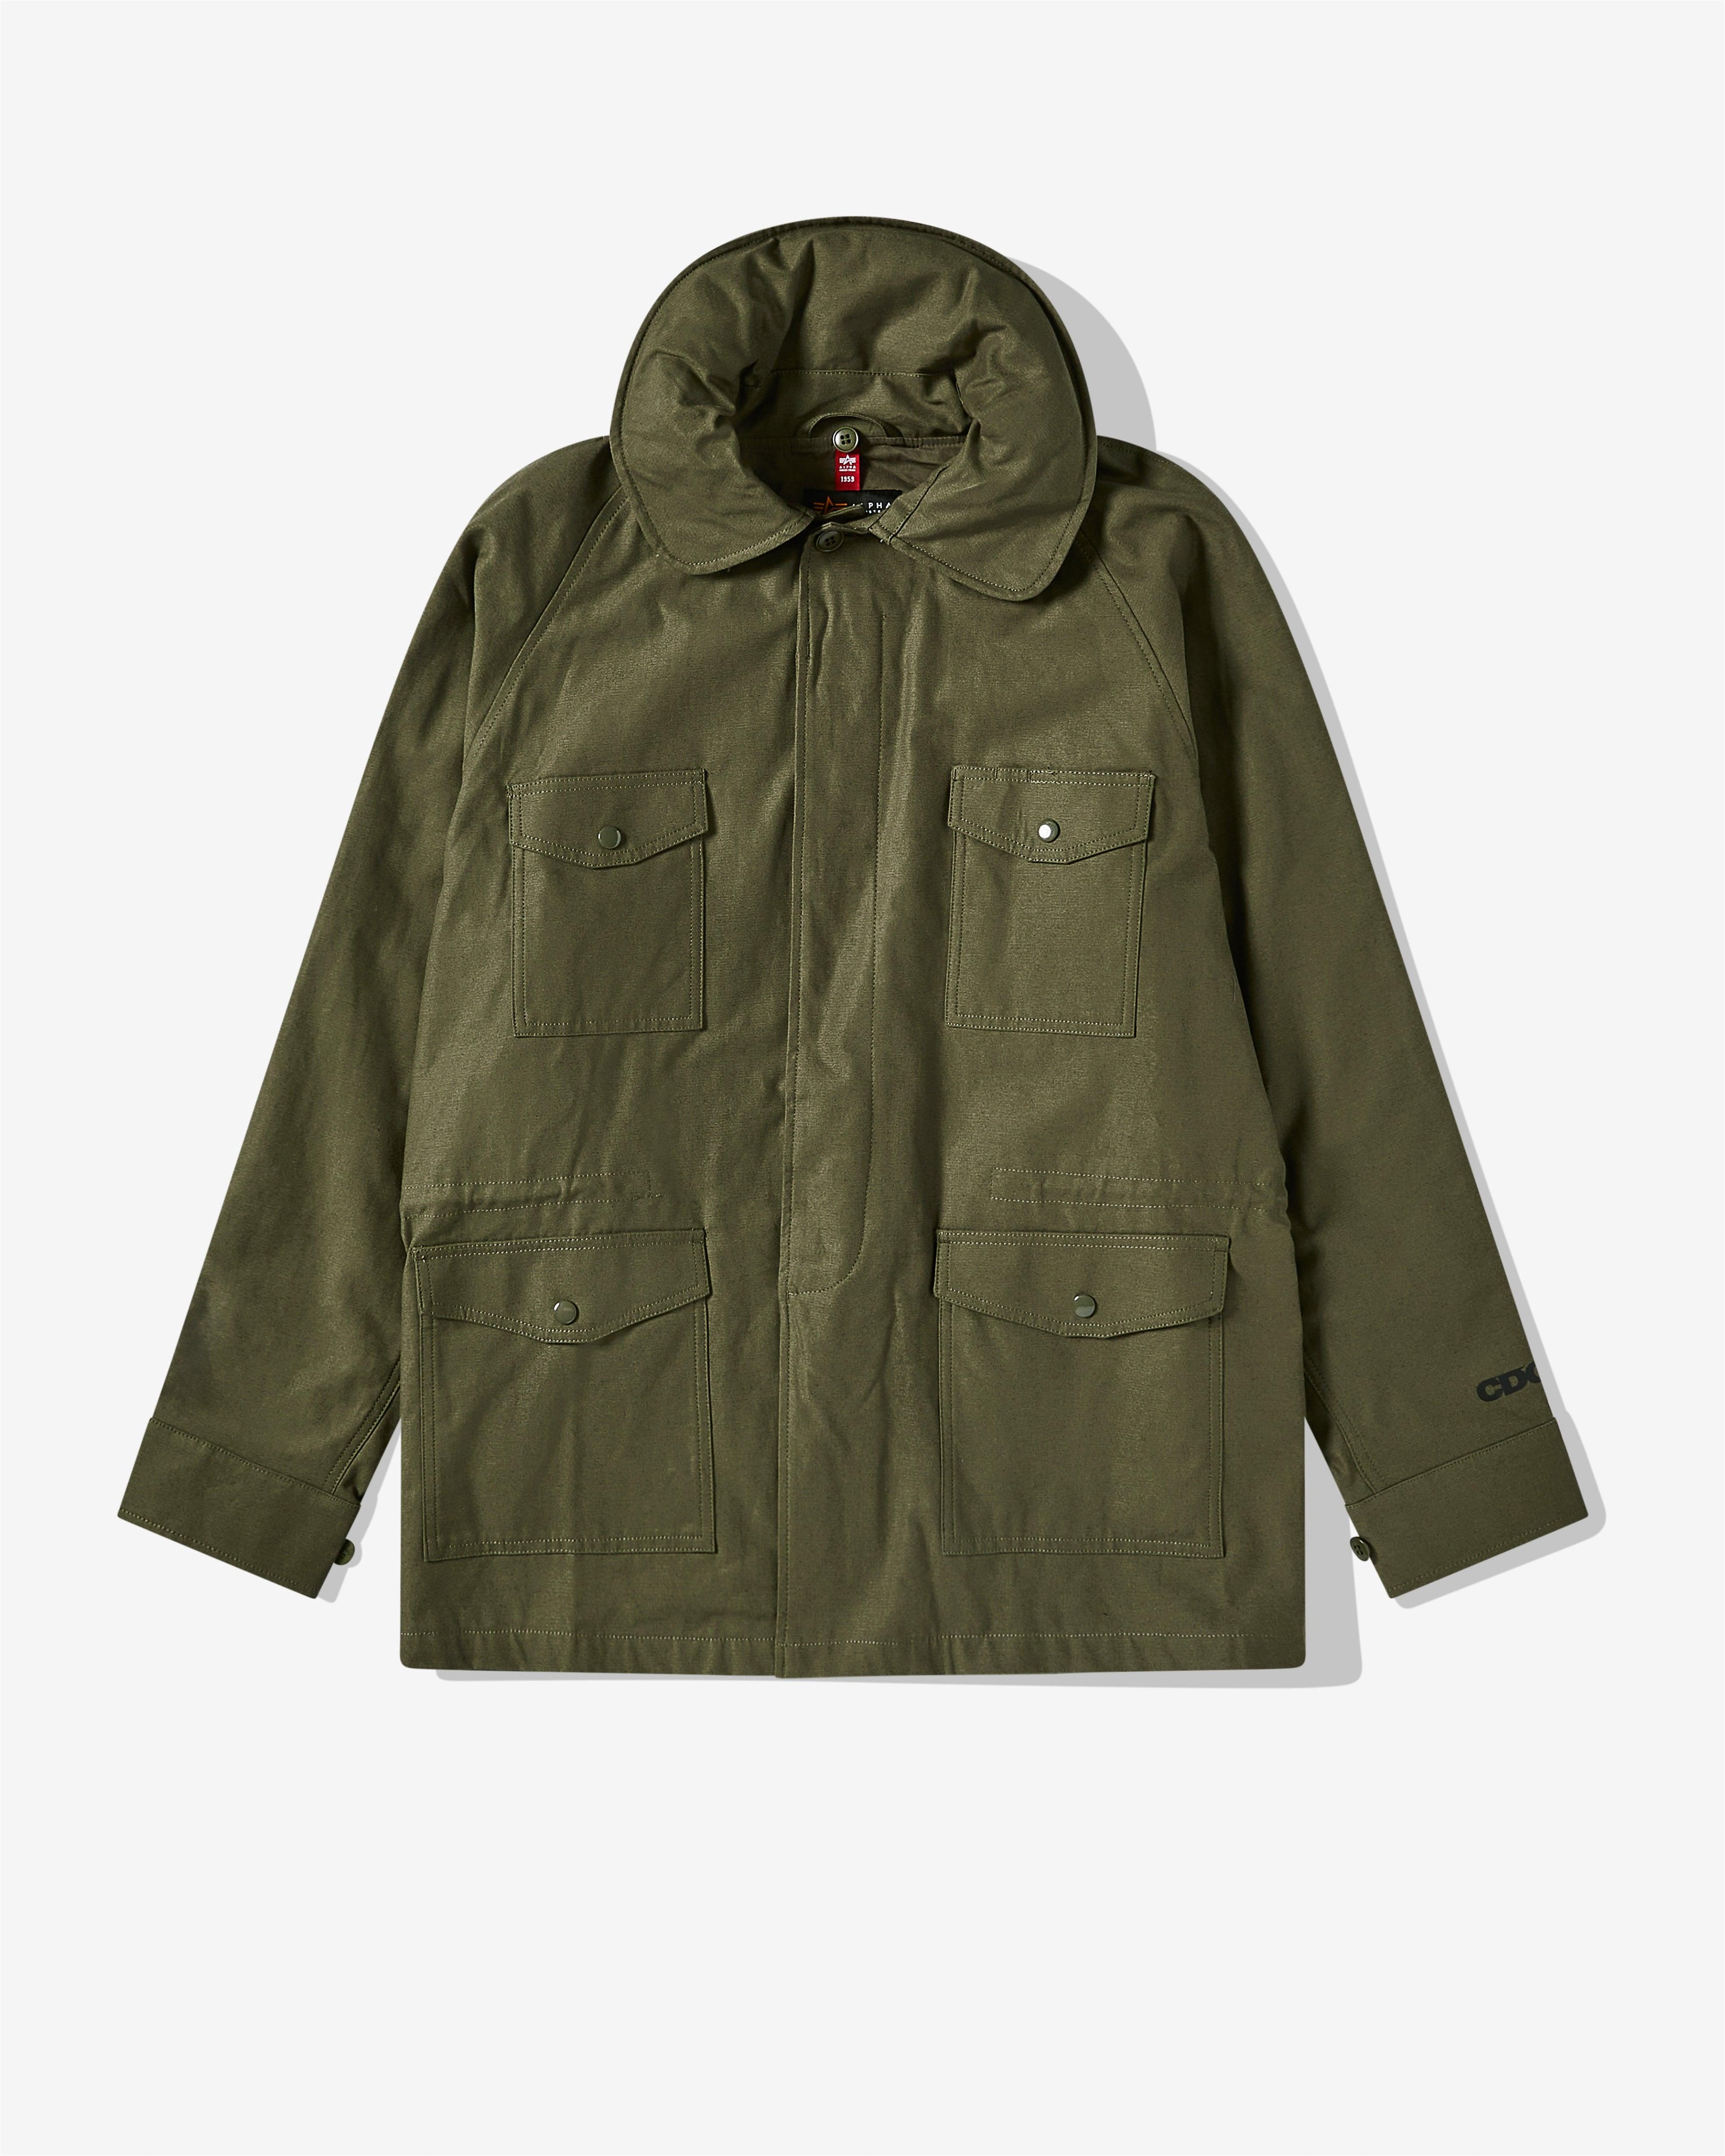 CDG - Alpha Industries Air Force Field Jacket - (Khaki) by COMME DES GARCONS